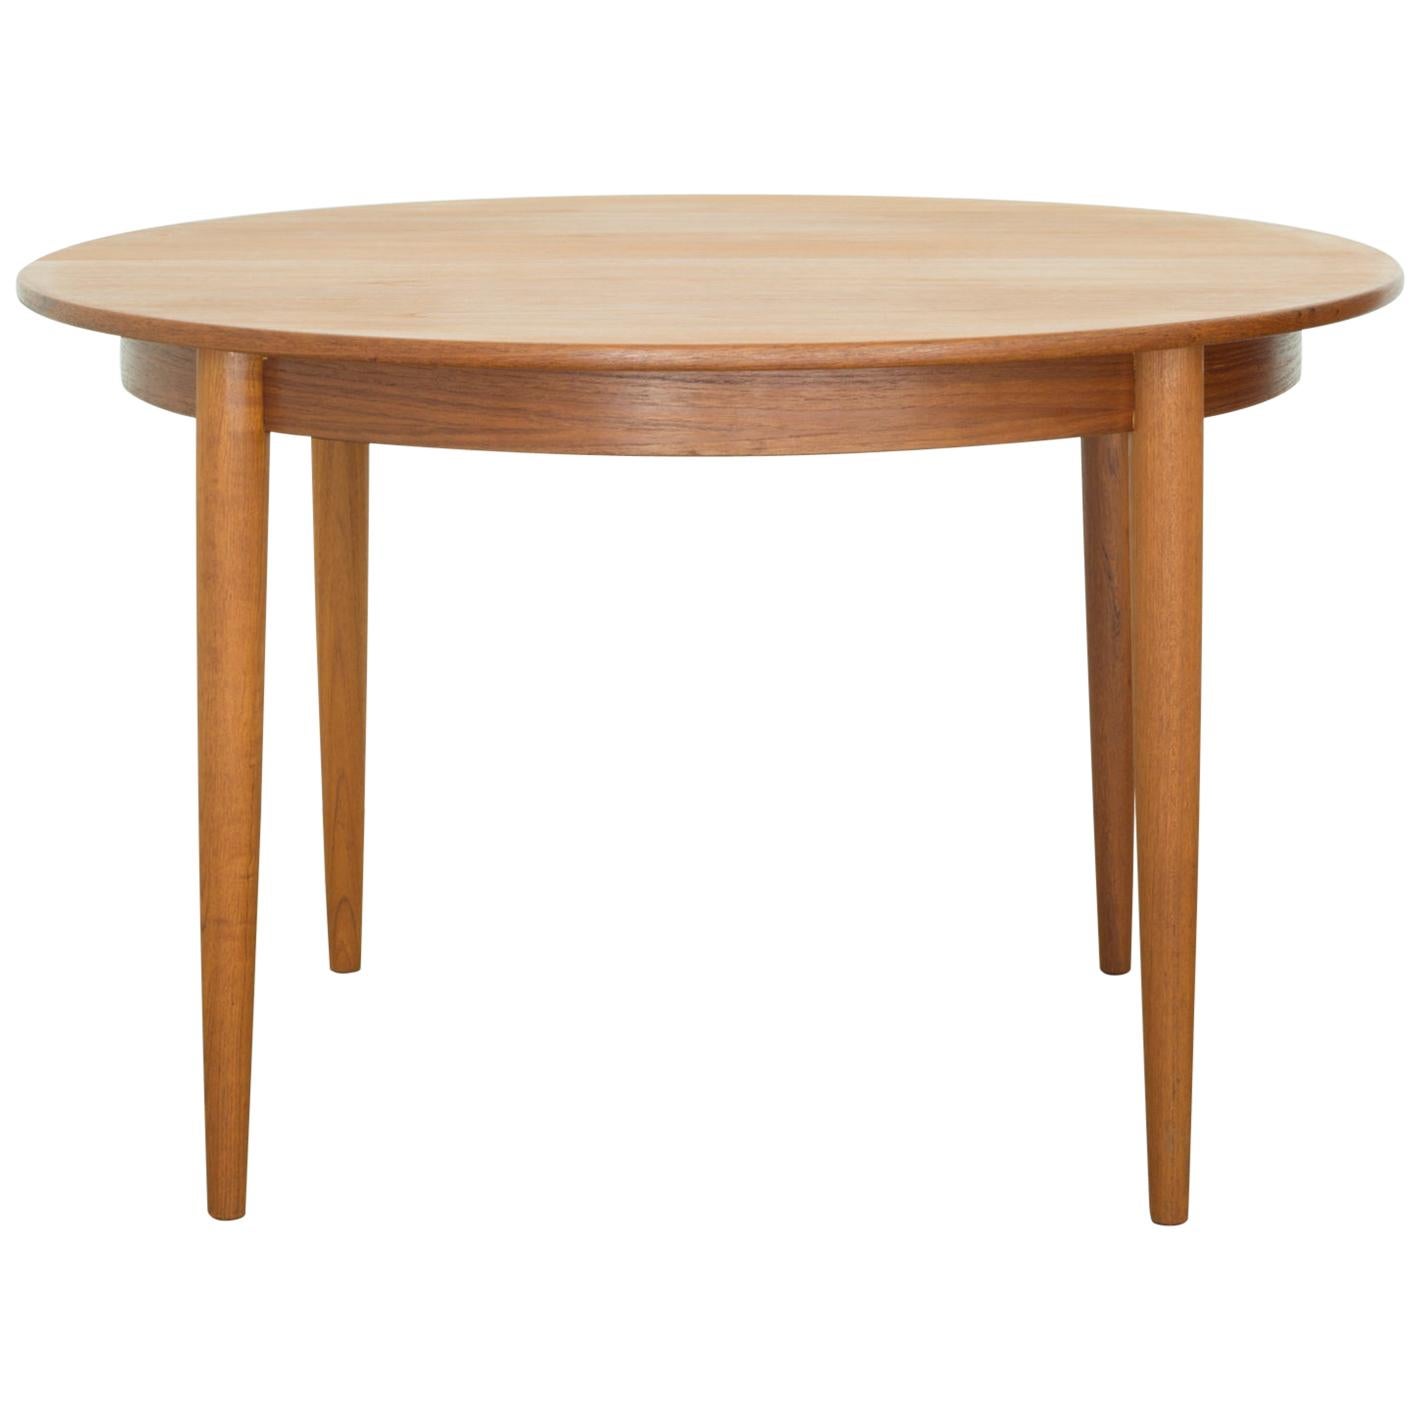 Danish Midcentury Round to Oval Dining Table by Gudme Mobelfabrik, circa 1960s